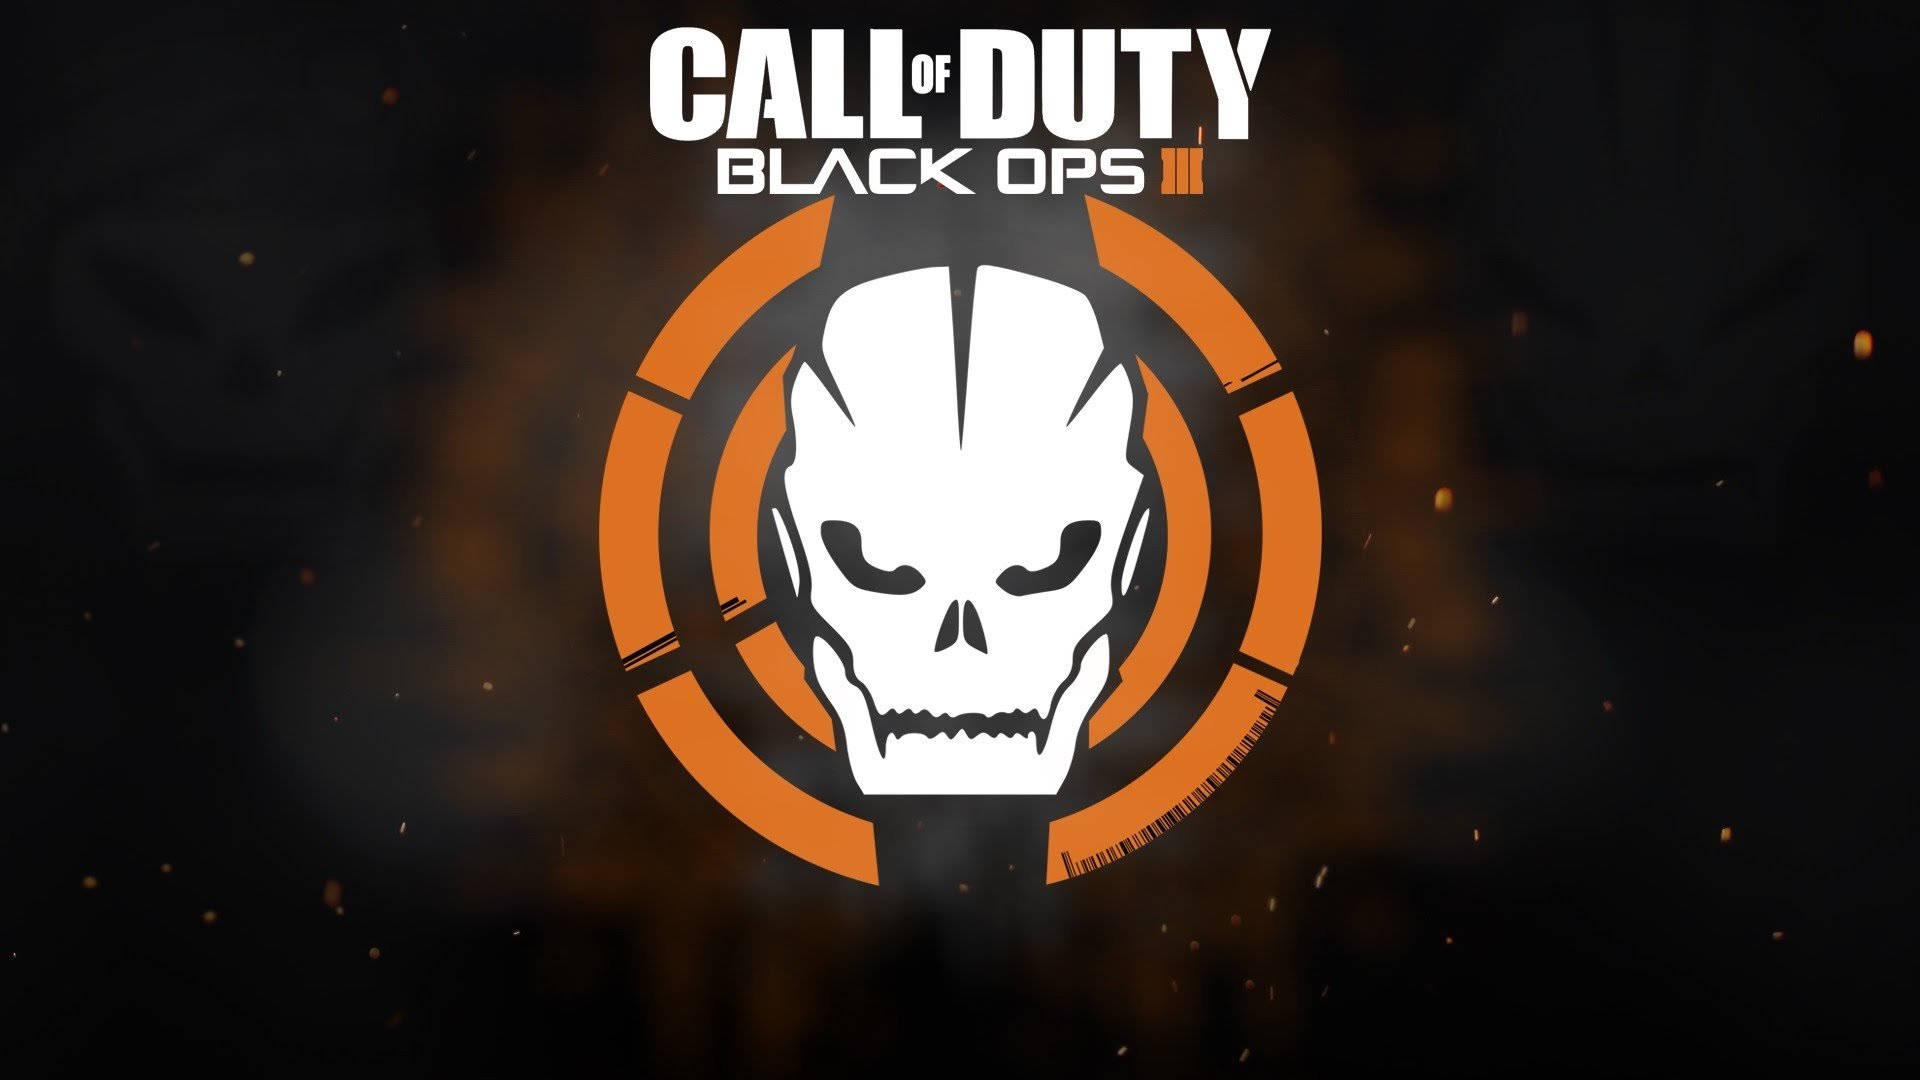 Take a stand with the Call of Duty Black Ops 3. Wallpaper